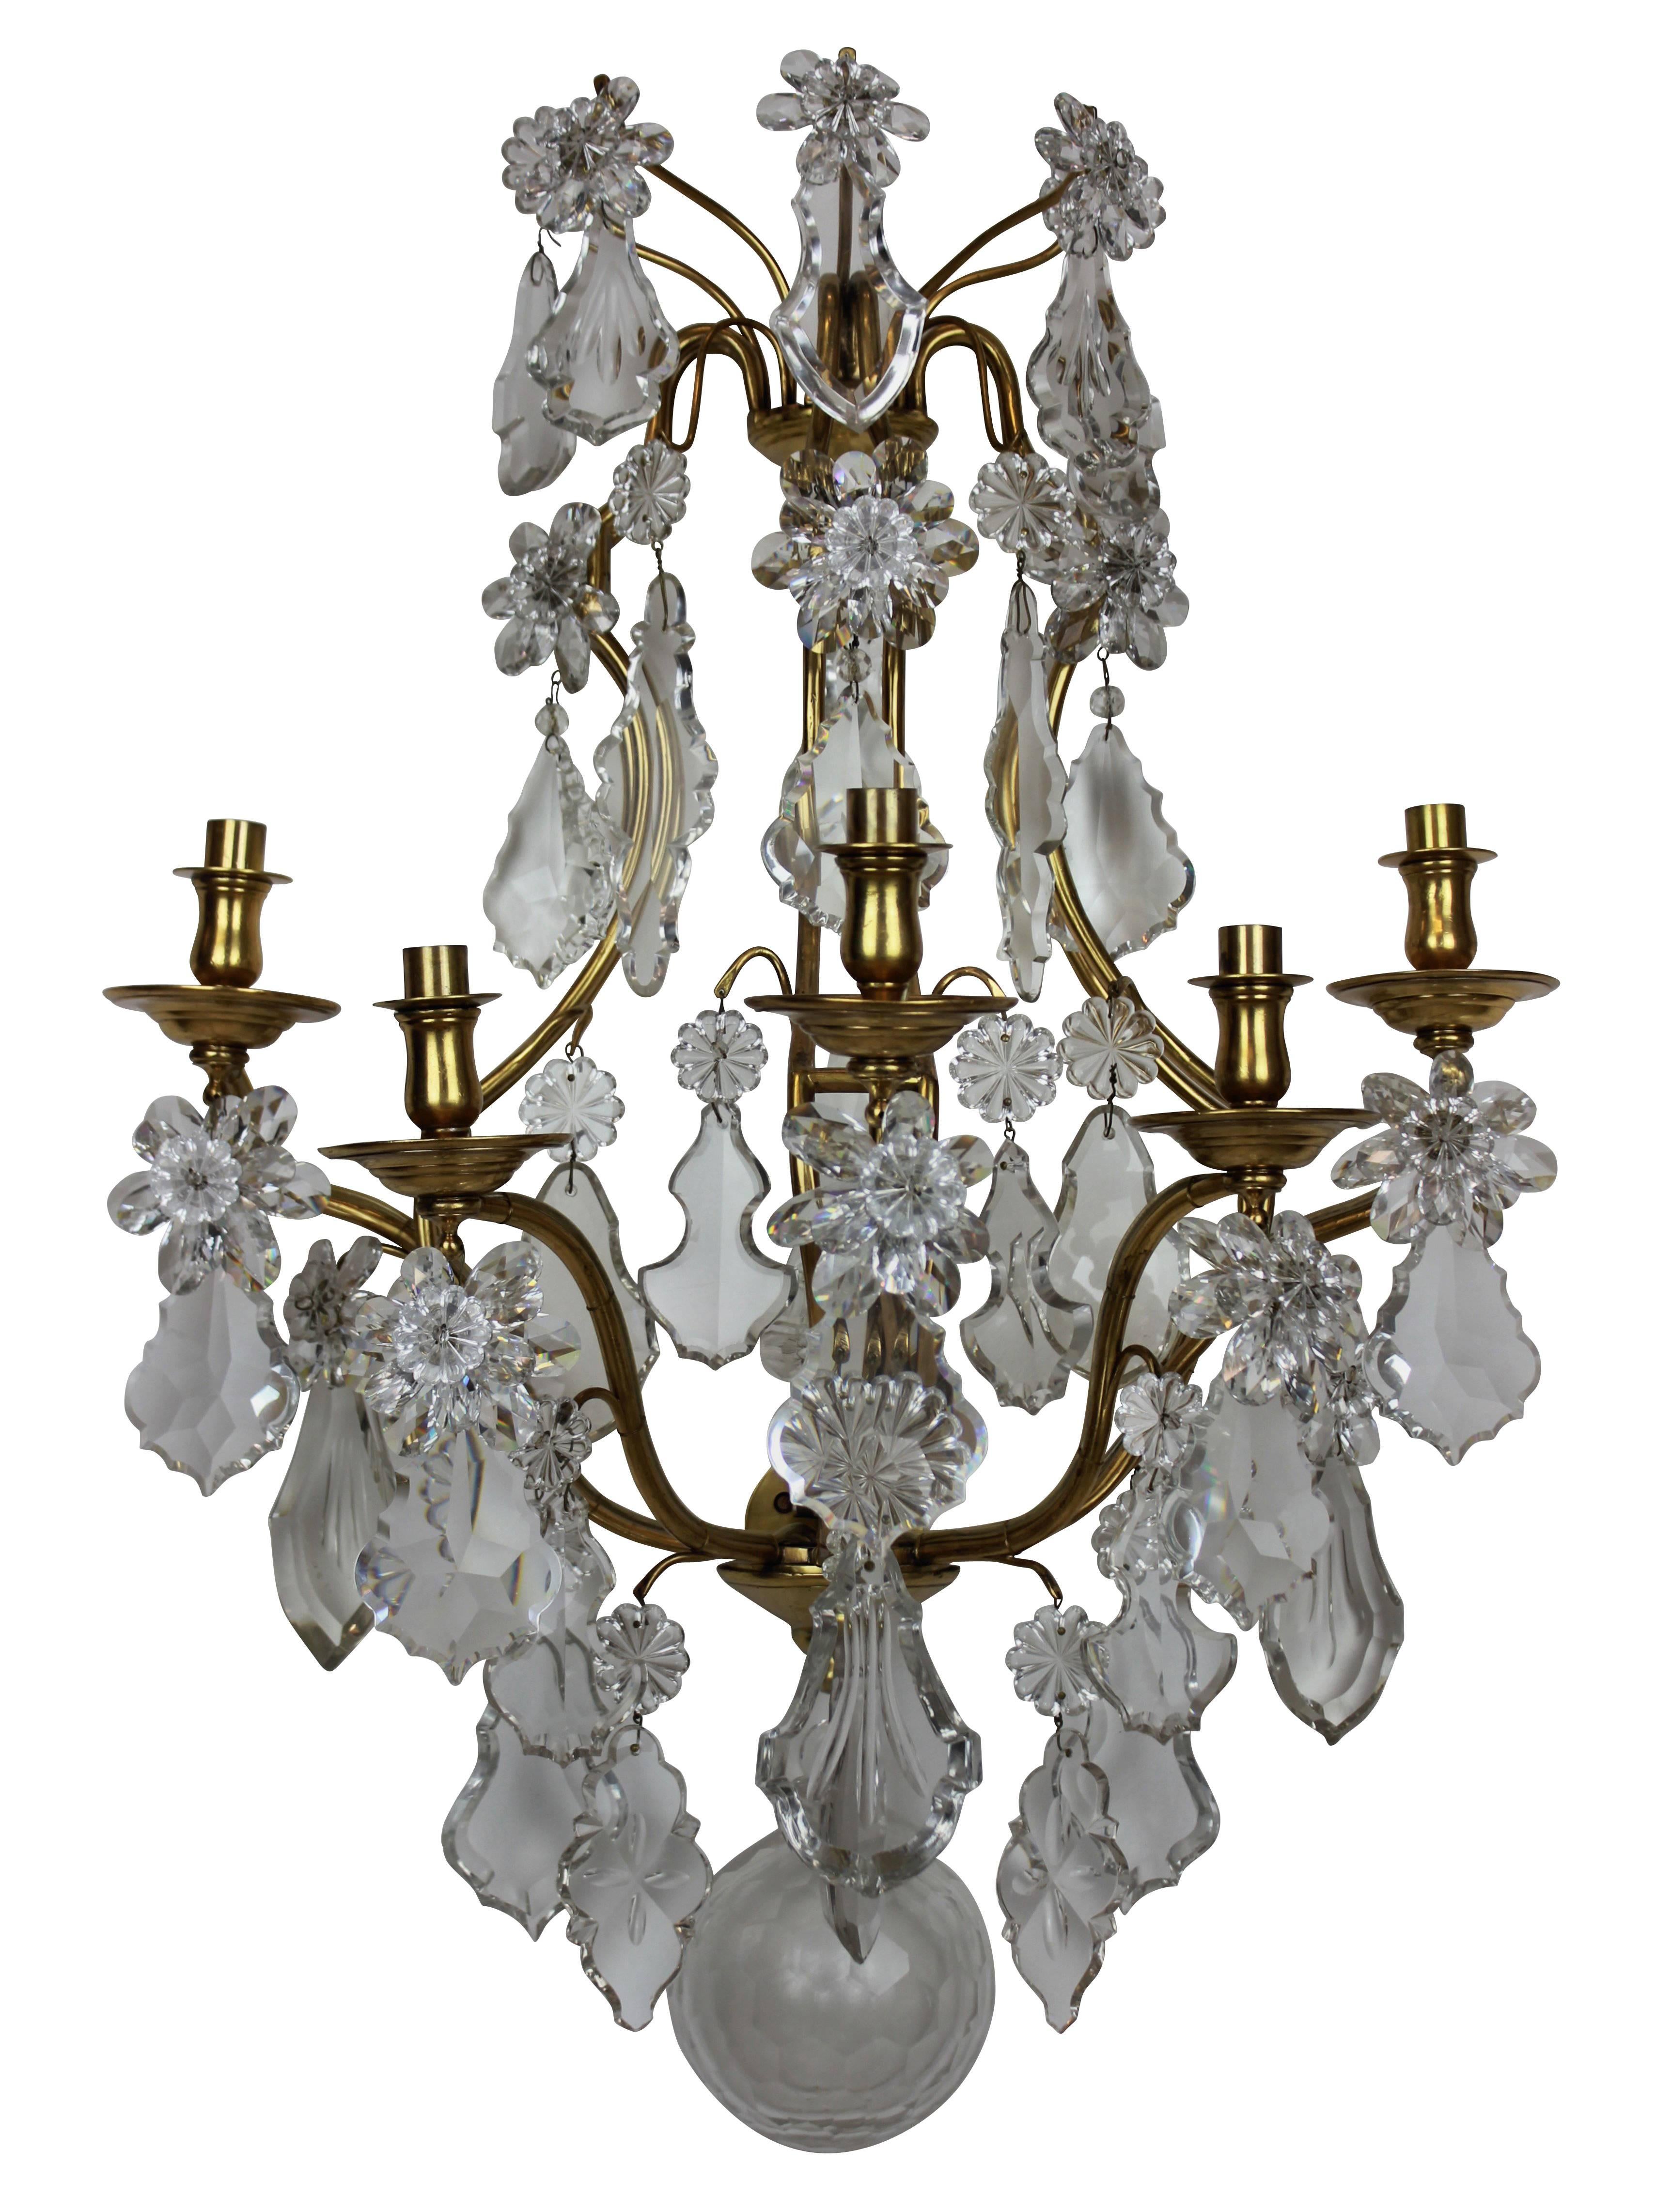 A pair of large ormolu and cut-glass wall sconces by Baccarat of Paris, en suite with a chandelier.

 